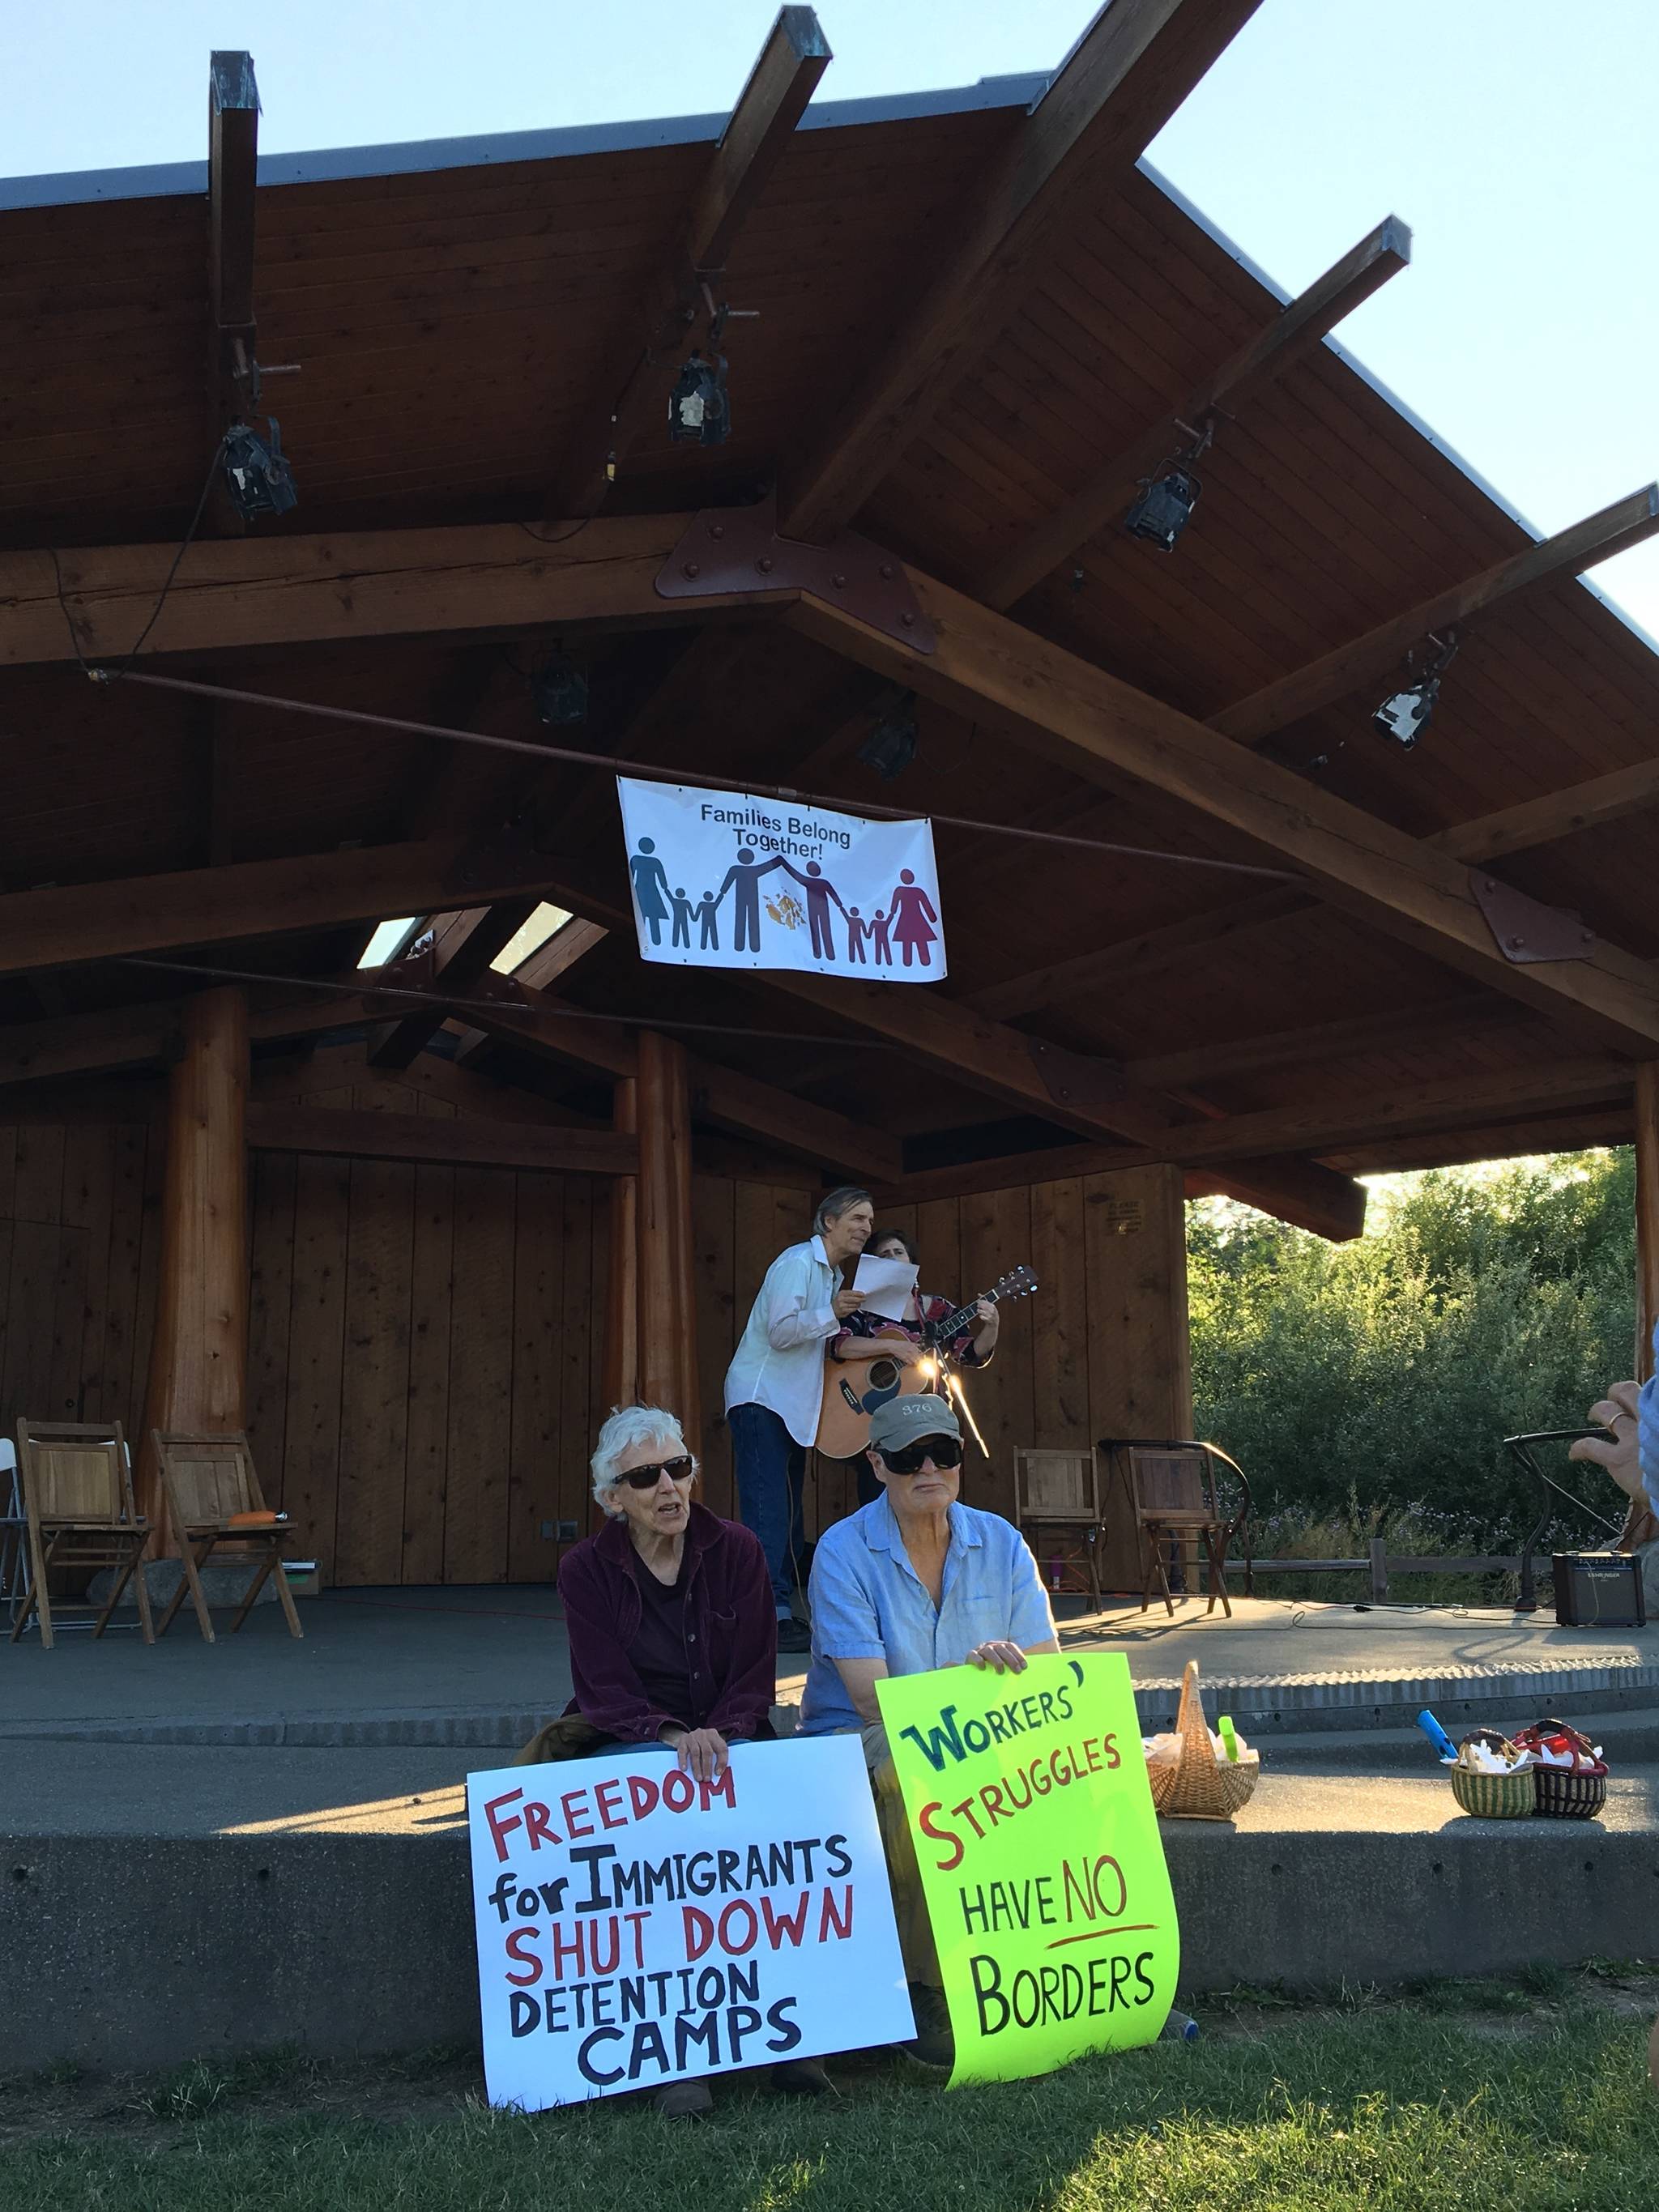 Local speakers inspire action at local vigil protest of ICE detainment camps